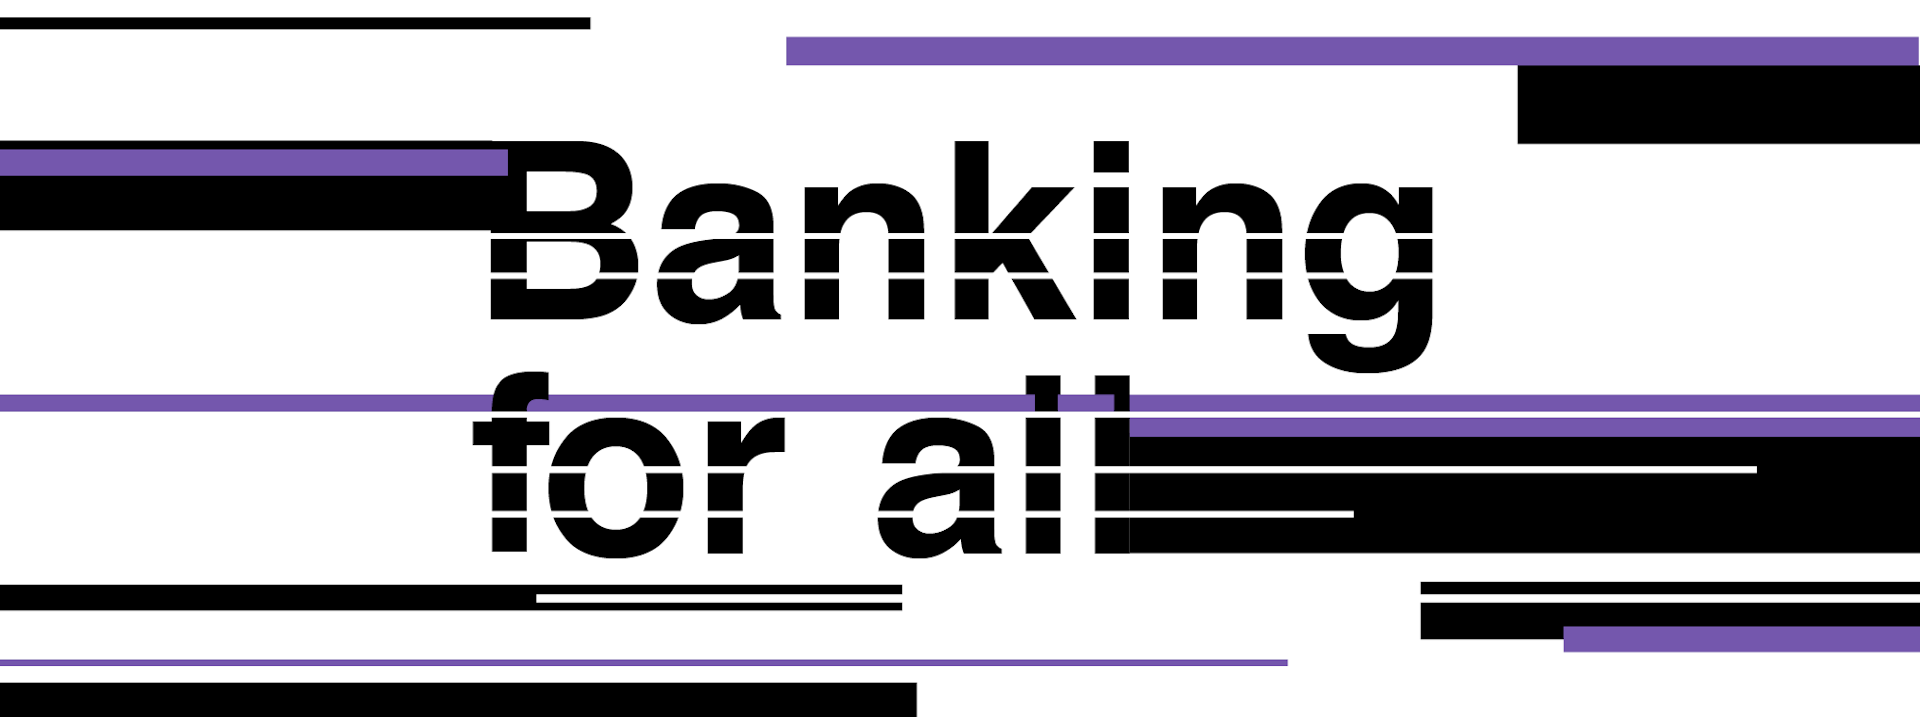 An image with horizontal lines with the text banking for all in the middle.